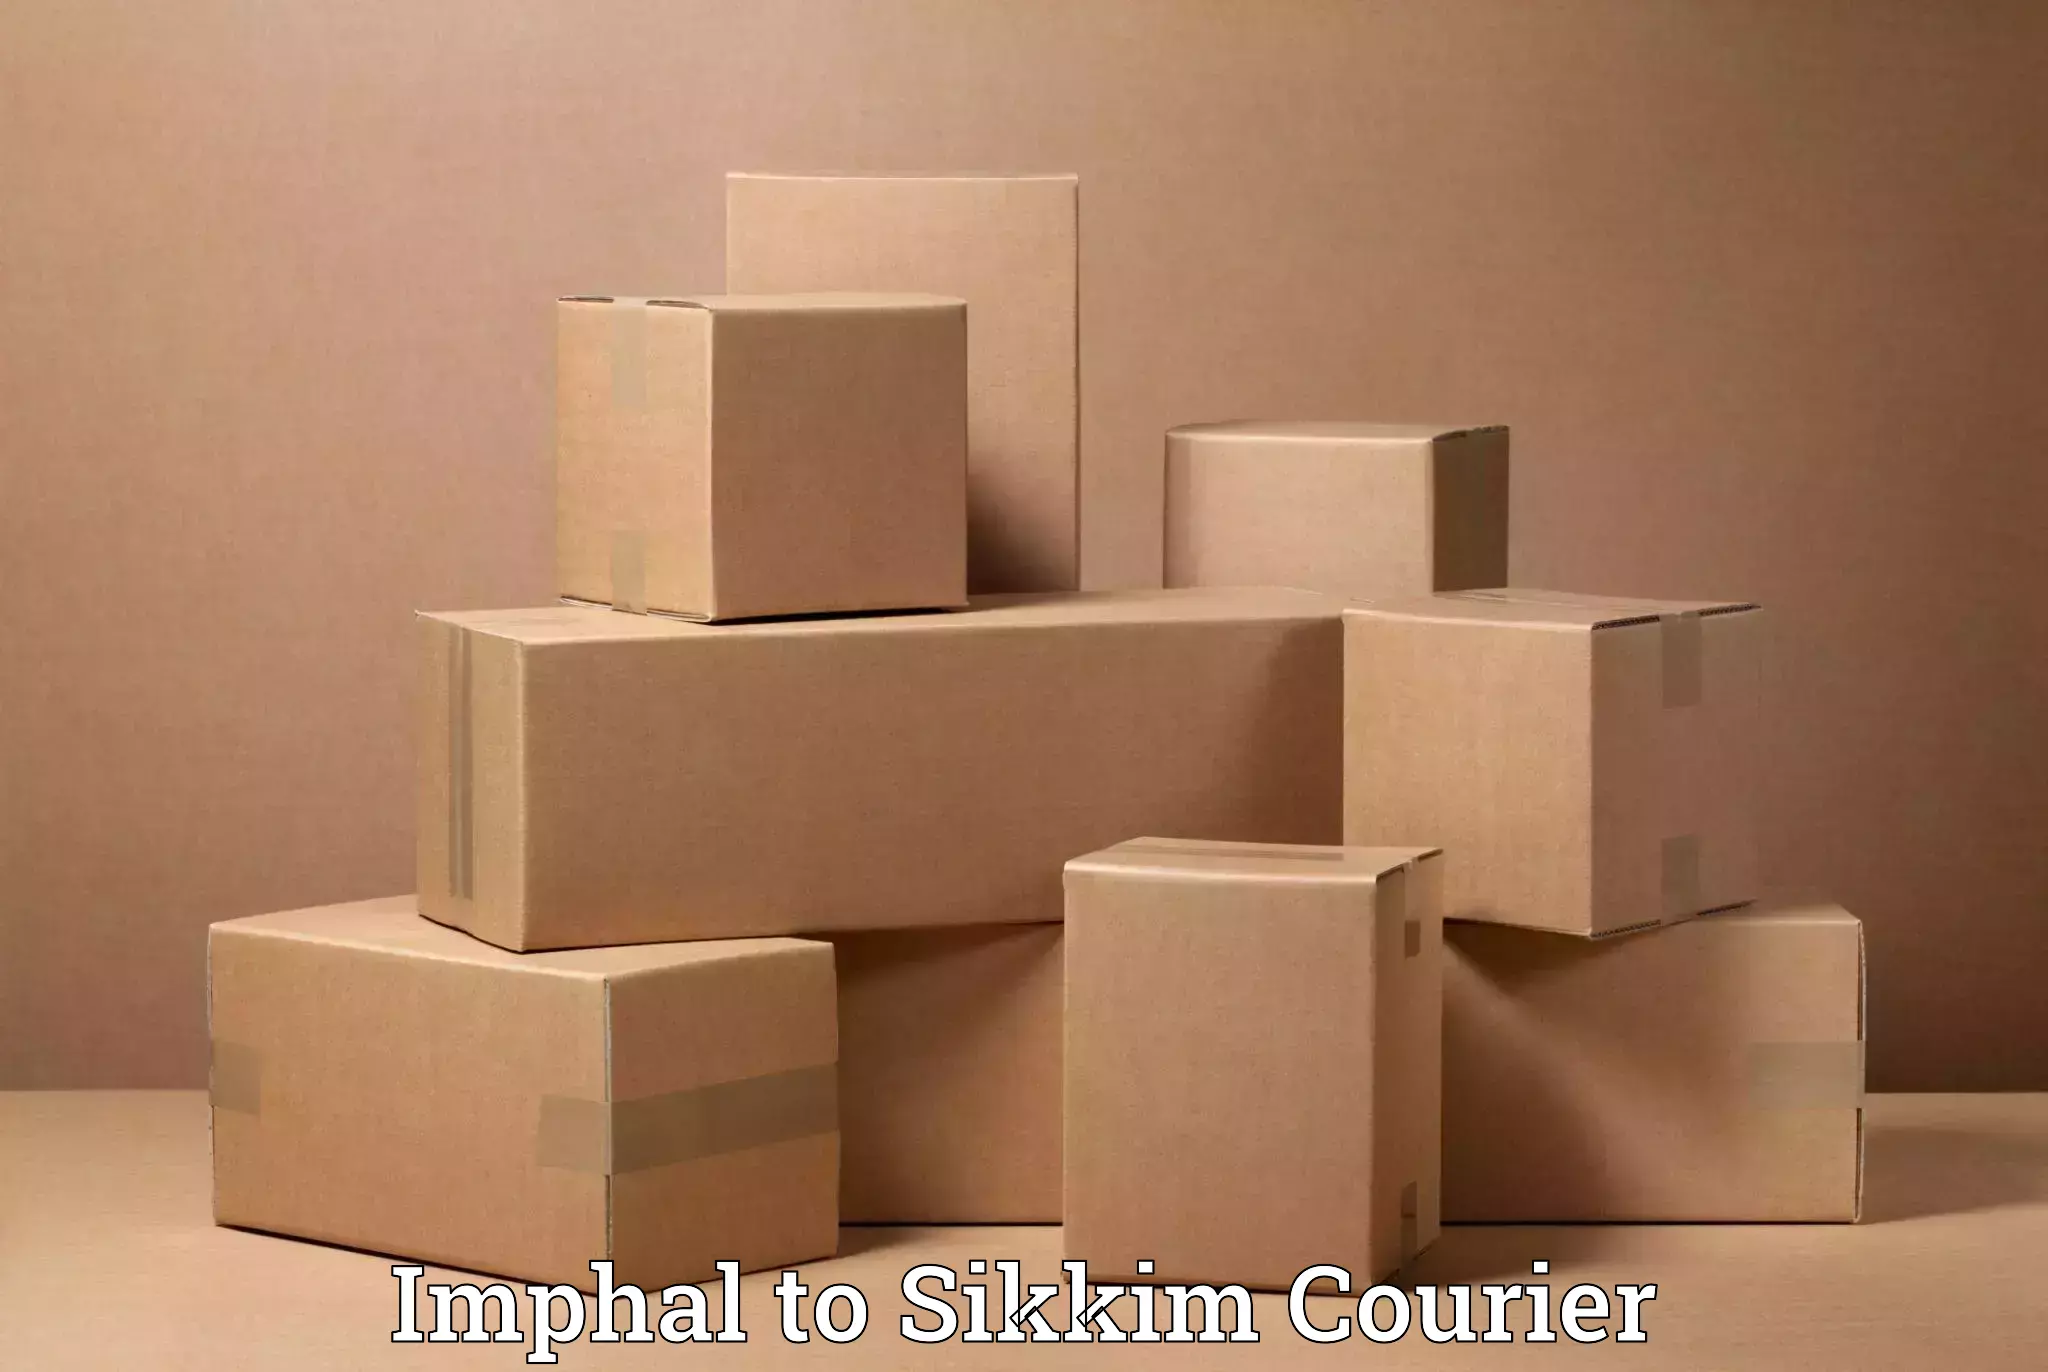 Professional moving company Imphal to Sikkim